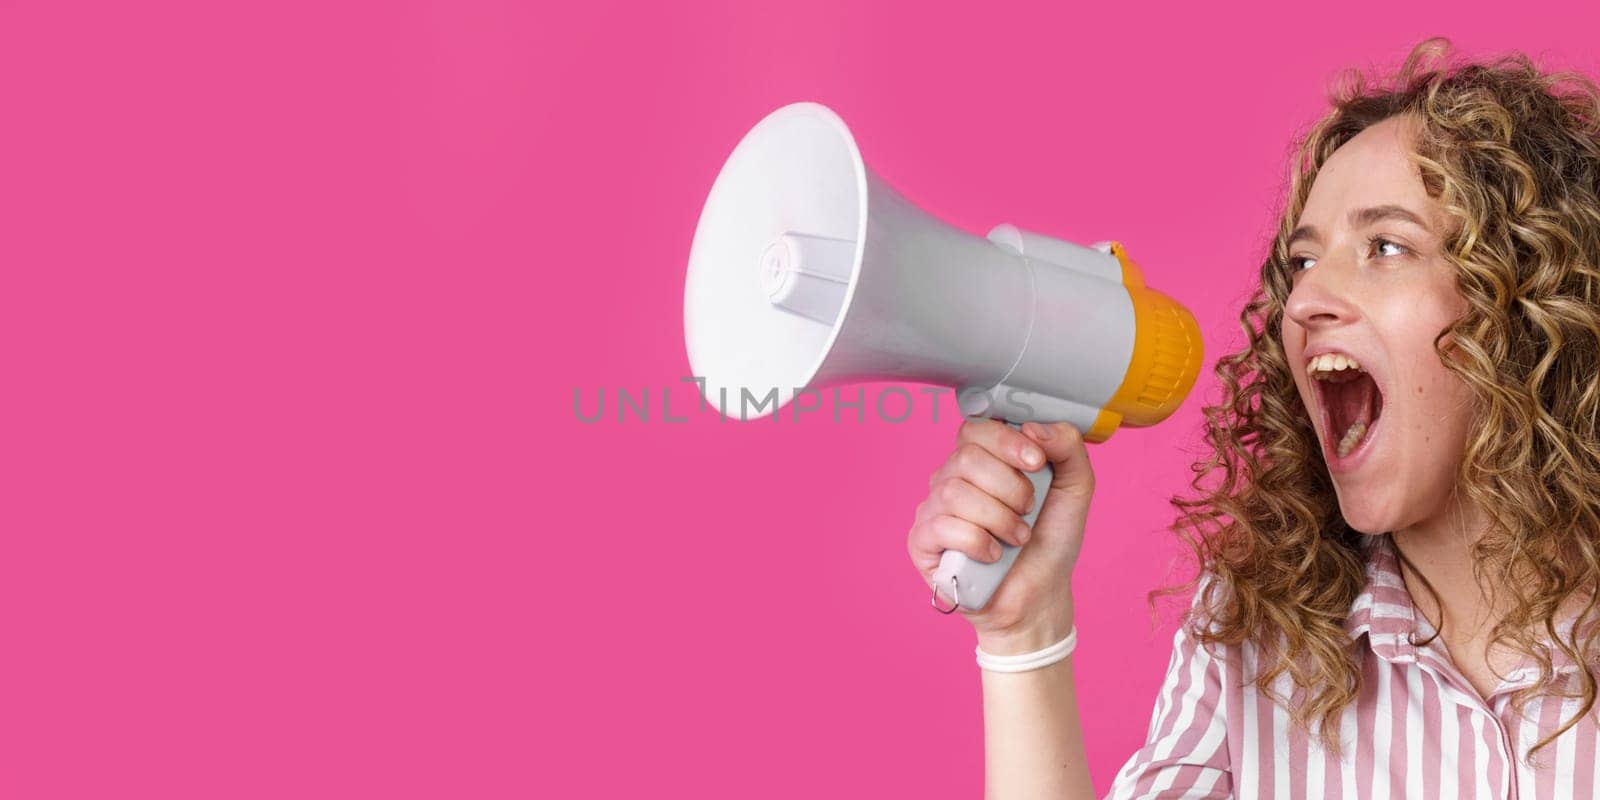 Young woman shouts into a megaphone. Isolated pink background. People sincere emotions lifestyle concept.